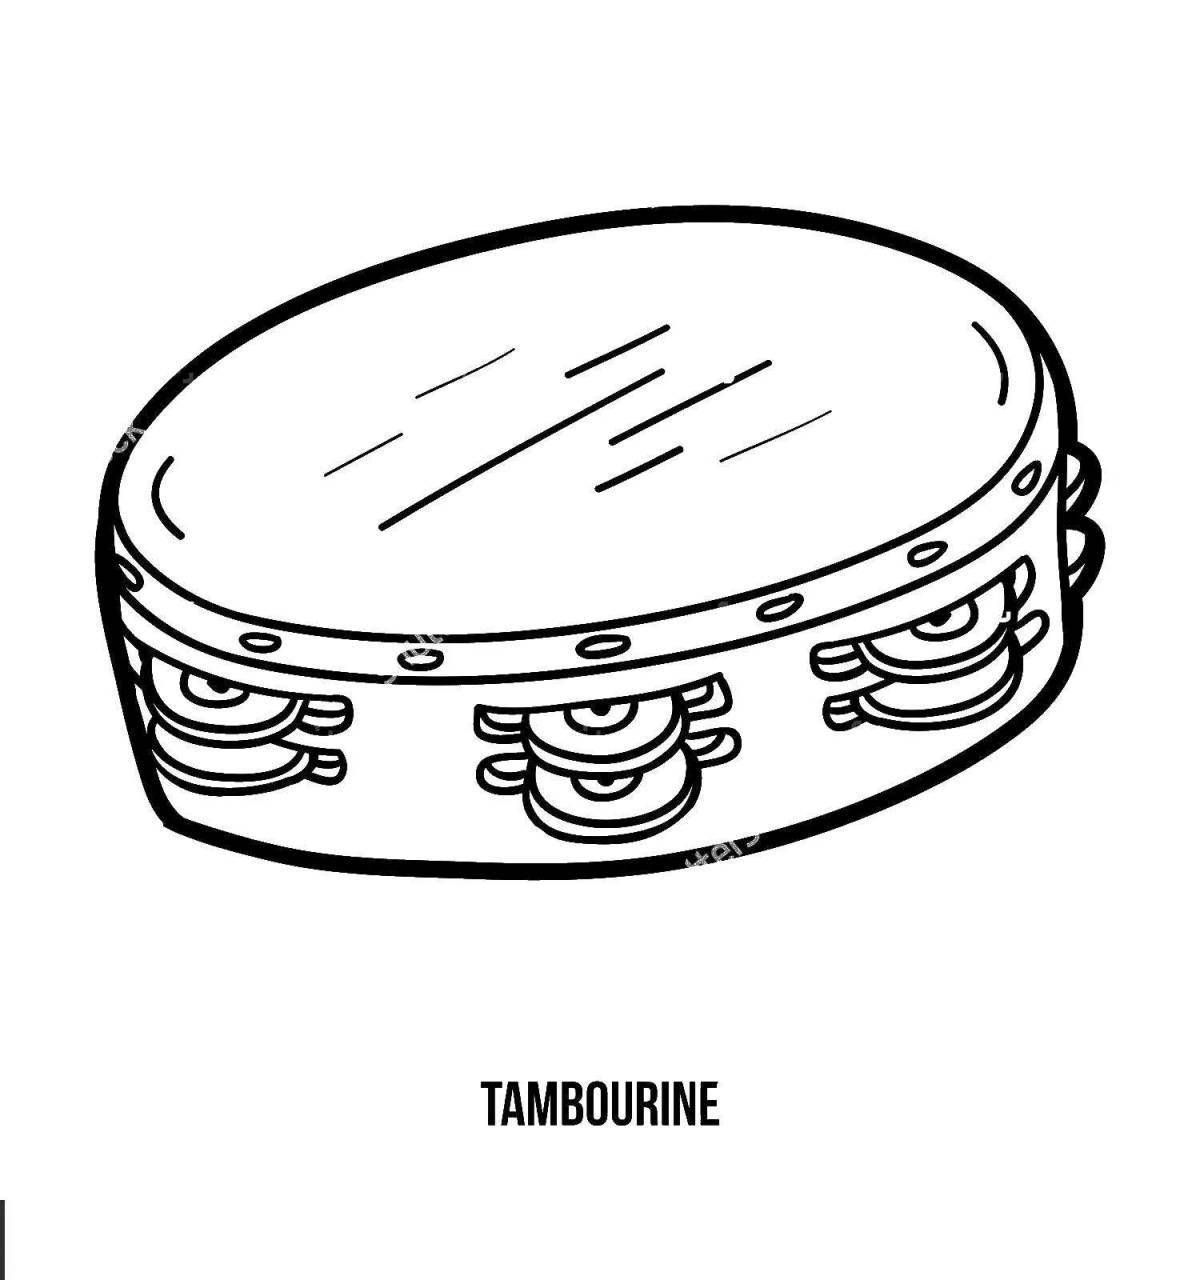 Shiny tambourine coloring book for kids